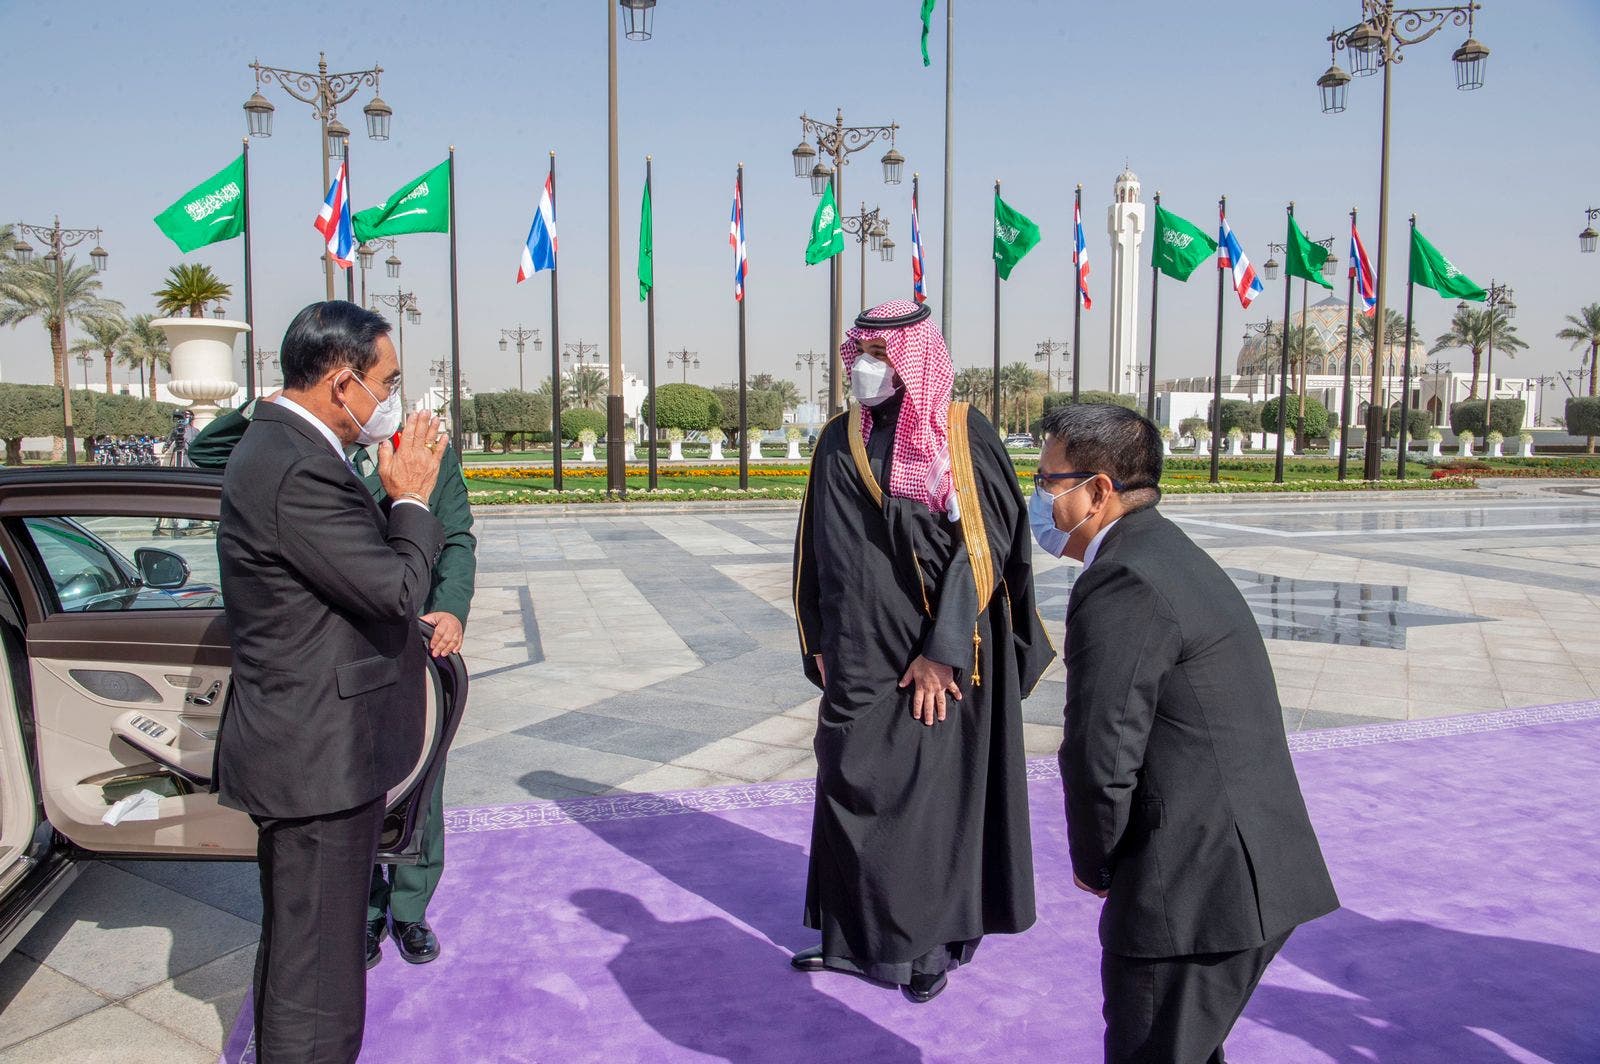 Saudi Arabia’s Crown Prince Mohammed bin Salman receives Thailand’s Prime Minister, Prayut Chan-o-cha, in Riyadh on January 25, 2022, as first official talks after 30 years get underway. (SPA)